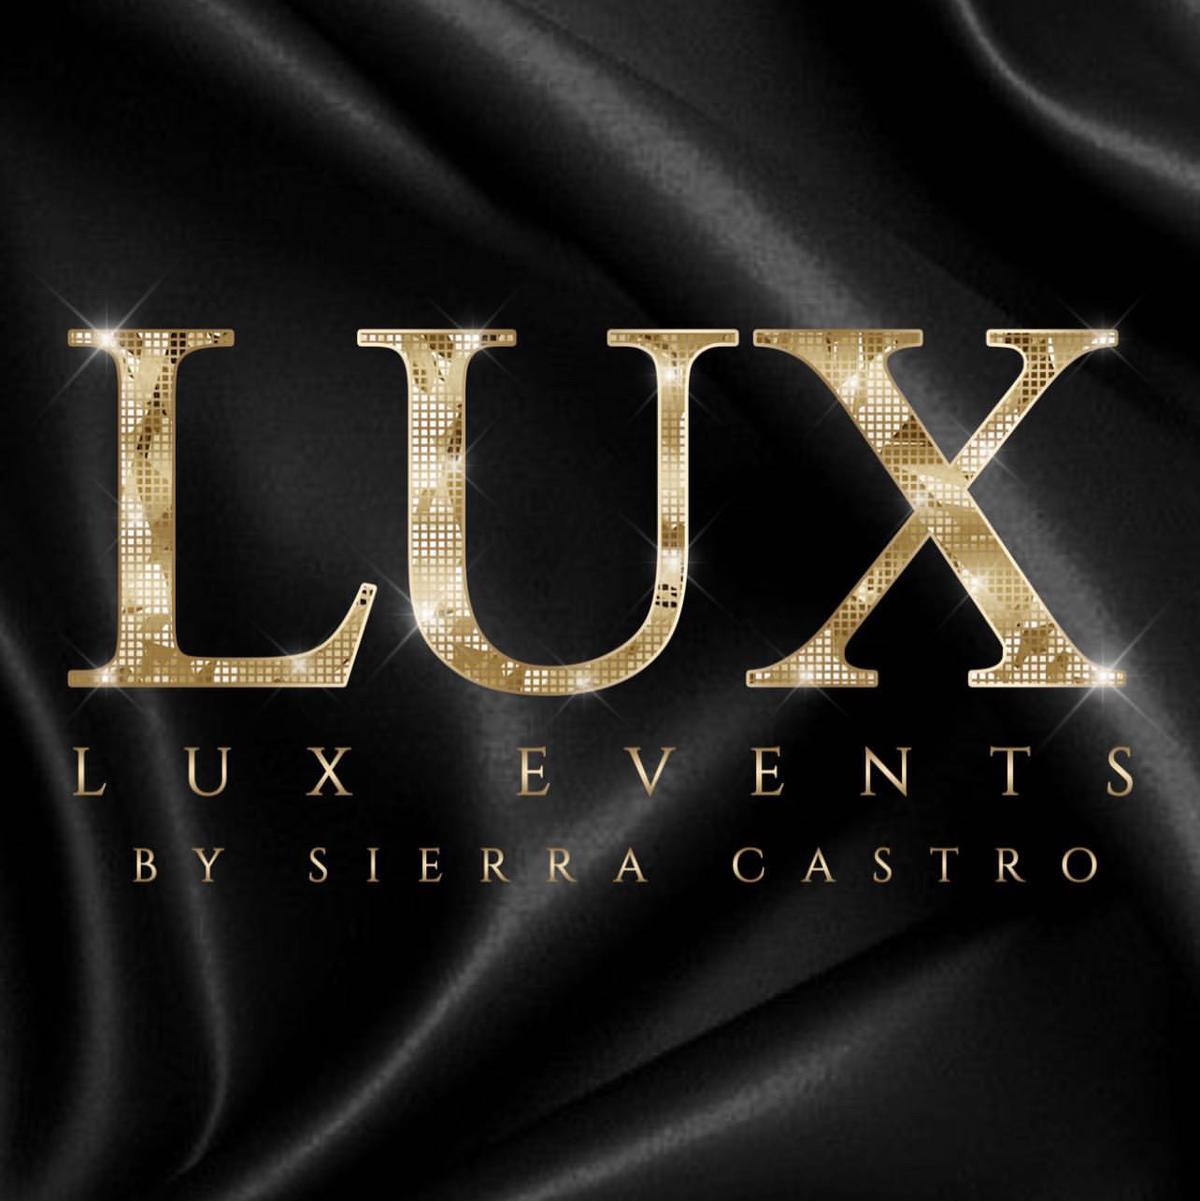 Lux Events Tx's images